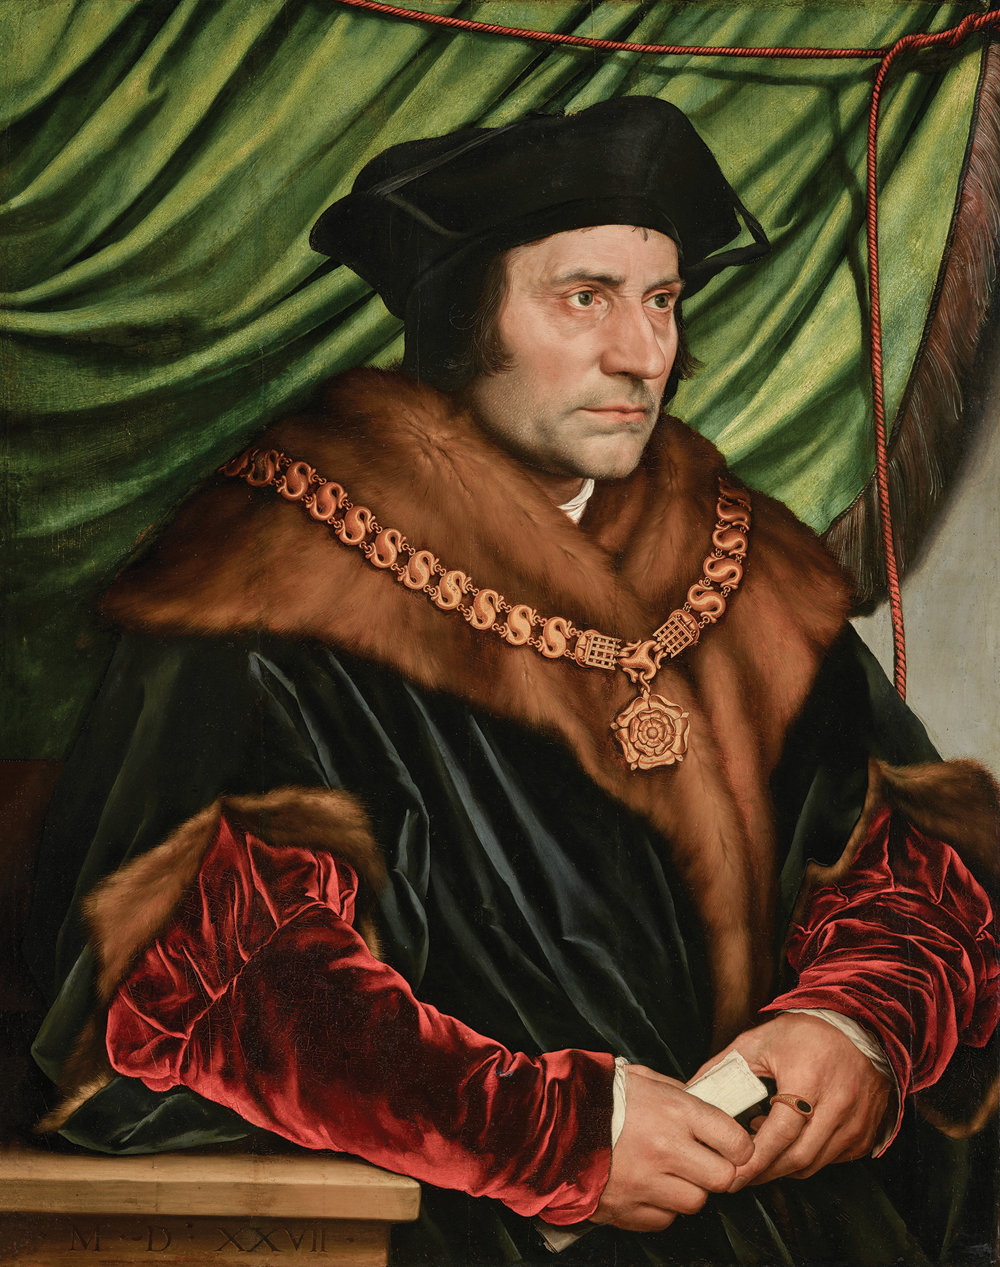 A MAN FOR ALL SEASONS—“Portrait of Sir Thomas More” is on exhibit through May 15 at The Morgan Library & Museum in Manhattan. Hans Holbein the Younger (1497/98-1543) Sir Thomas More 1527 Oil on panel 29 1/2 x 23 3/4 in. (74.9 x 60.3 cm) The Frick Collection, New York, 1912.1.77